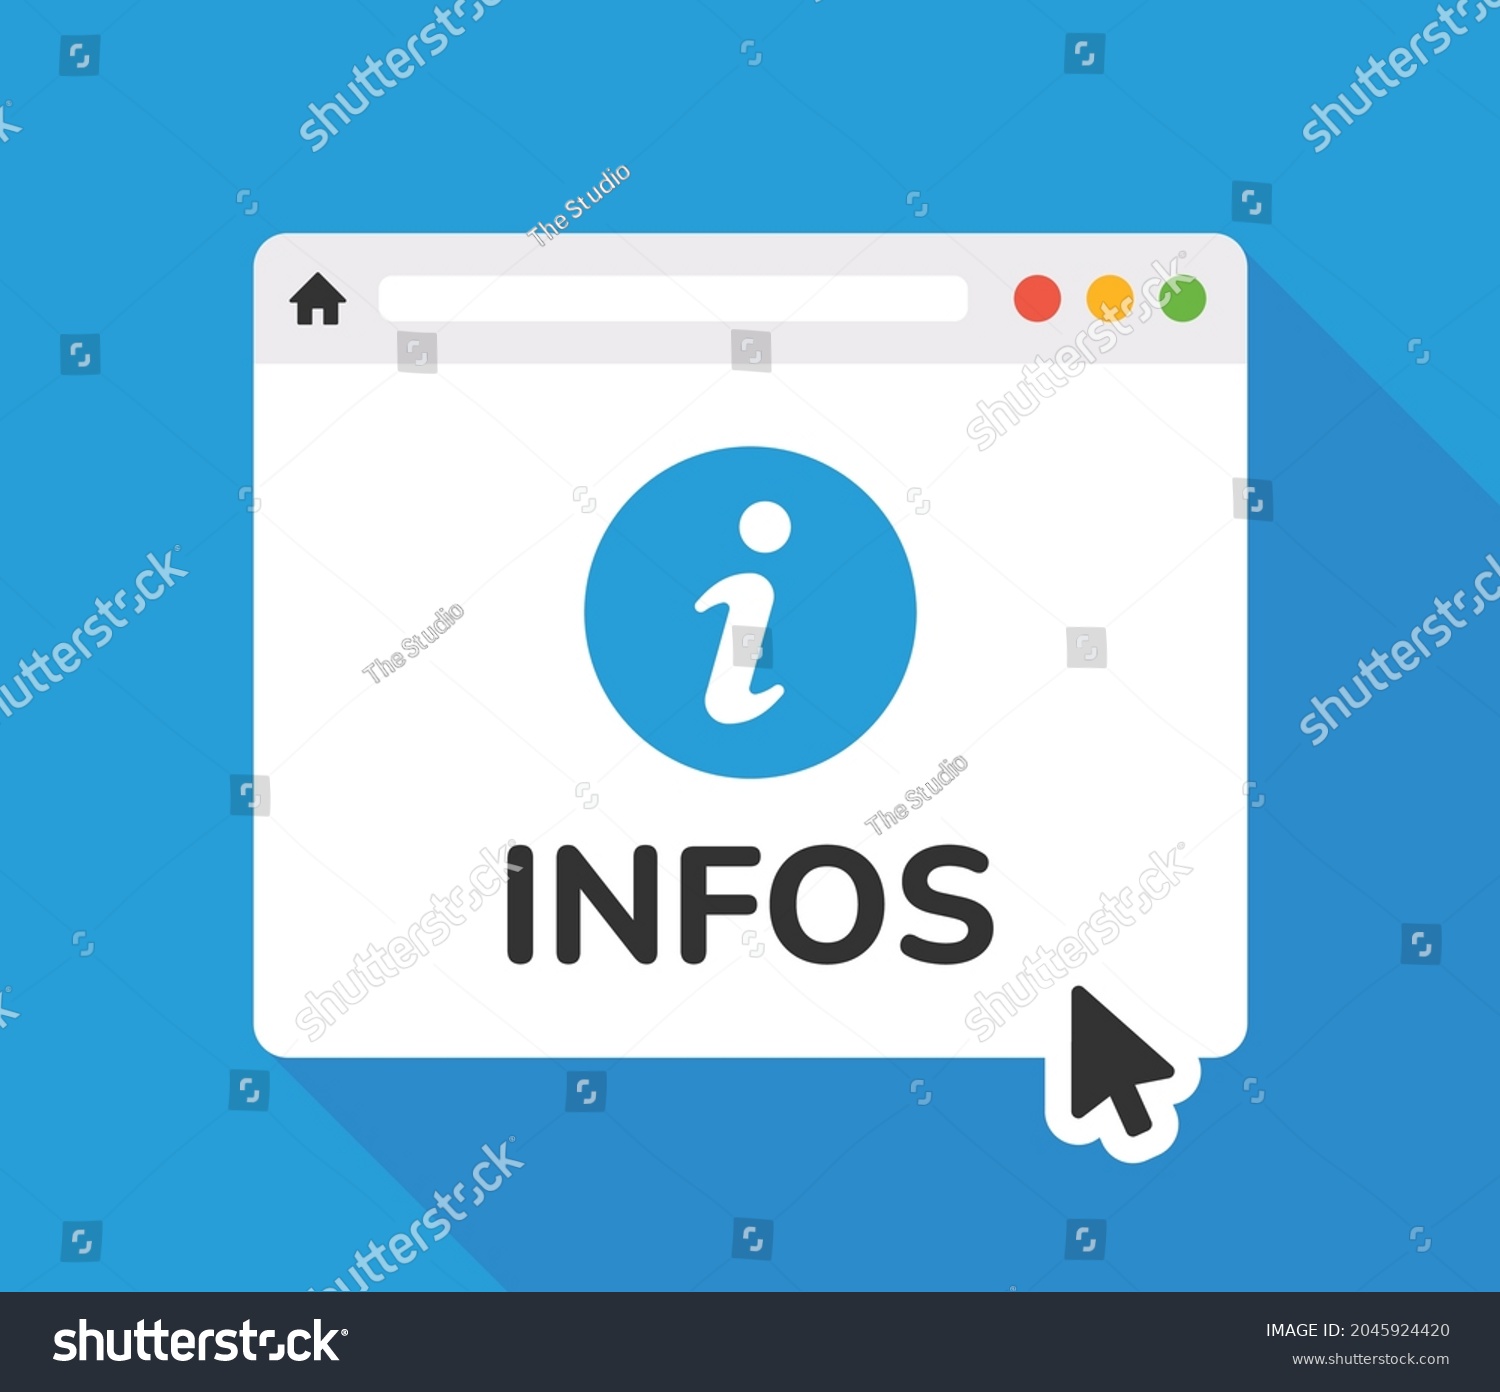 SVG of Online information icon. Web bowser with infos mark icon vector illustration svg